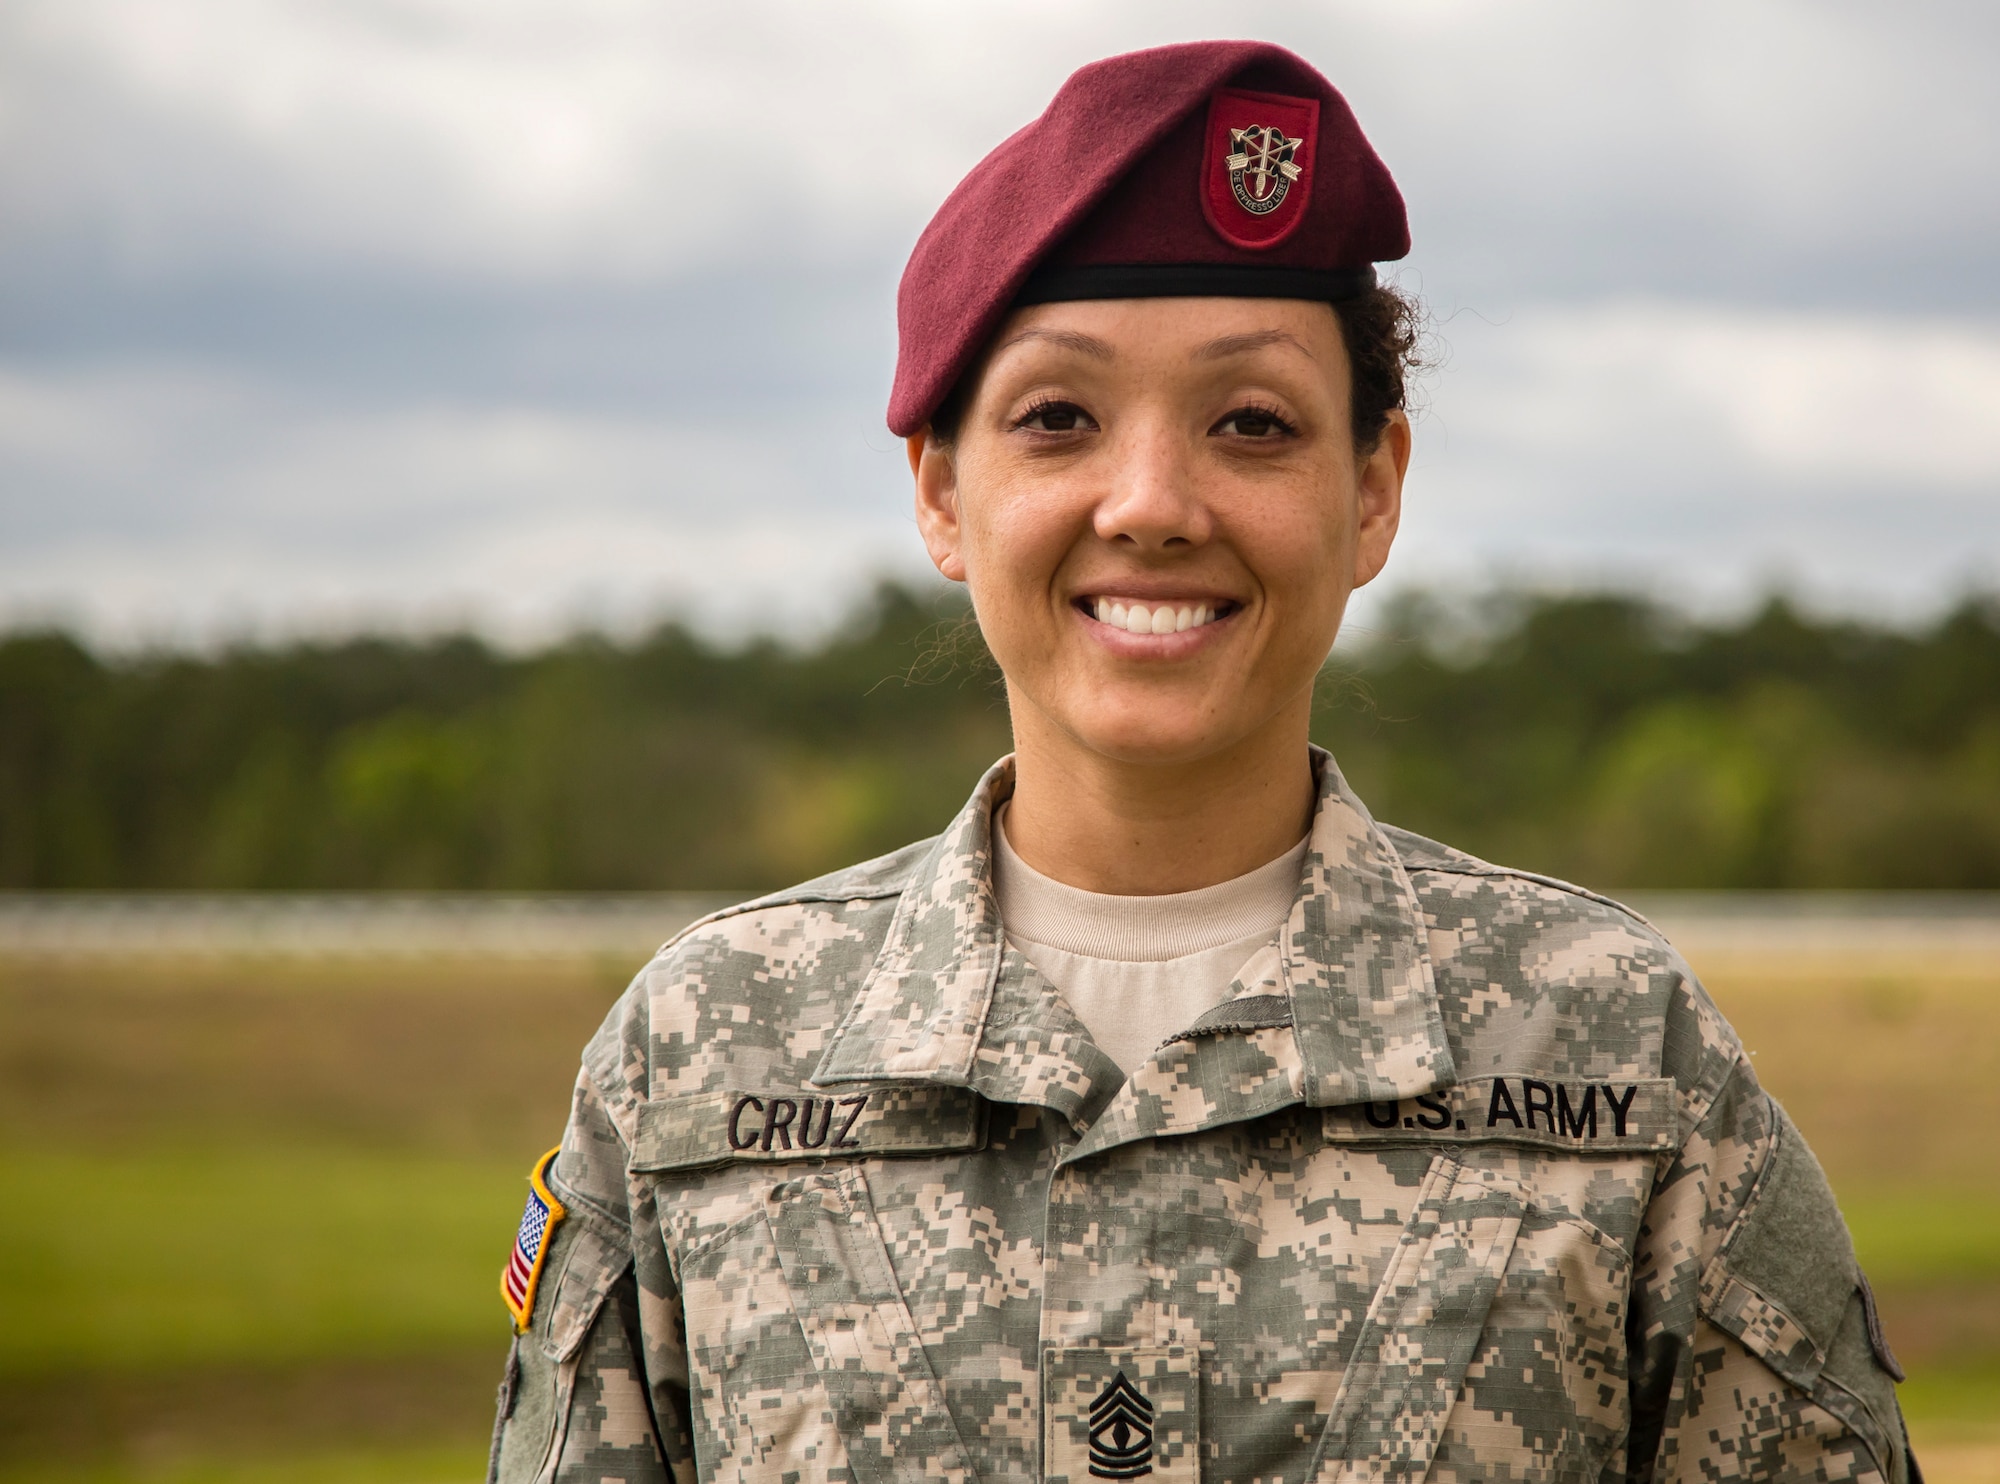 First Sgt. Sandrea Cruz leads over 150 soldiers in the 7th Special Forces Group (Airborne)’s Sustainment and Distribution Company.  Cruz is inspired by her father, a former Green Beret who served in both the 7th and 3rd Special Forces Groups.  (U.S. Army photo/Staff Sgt. Bryan Henson)